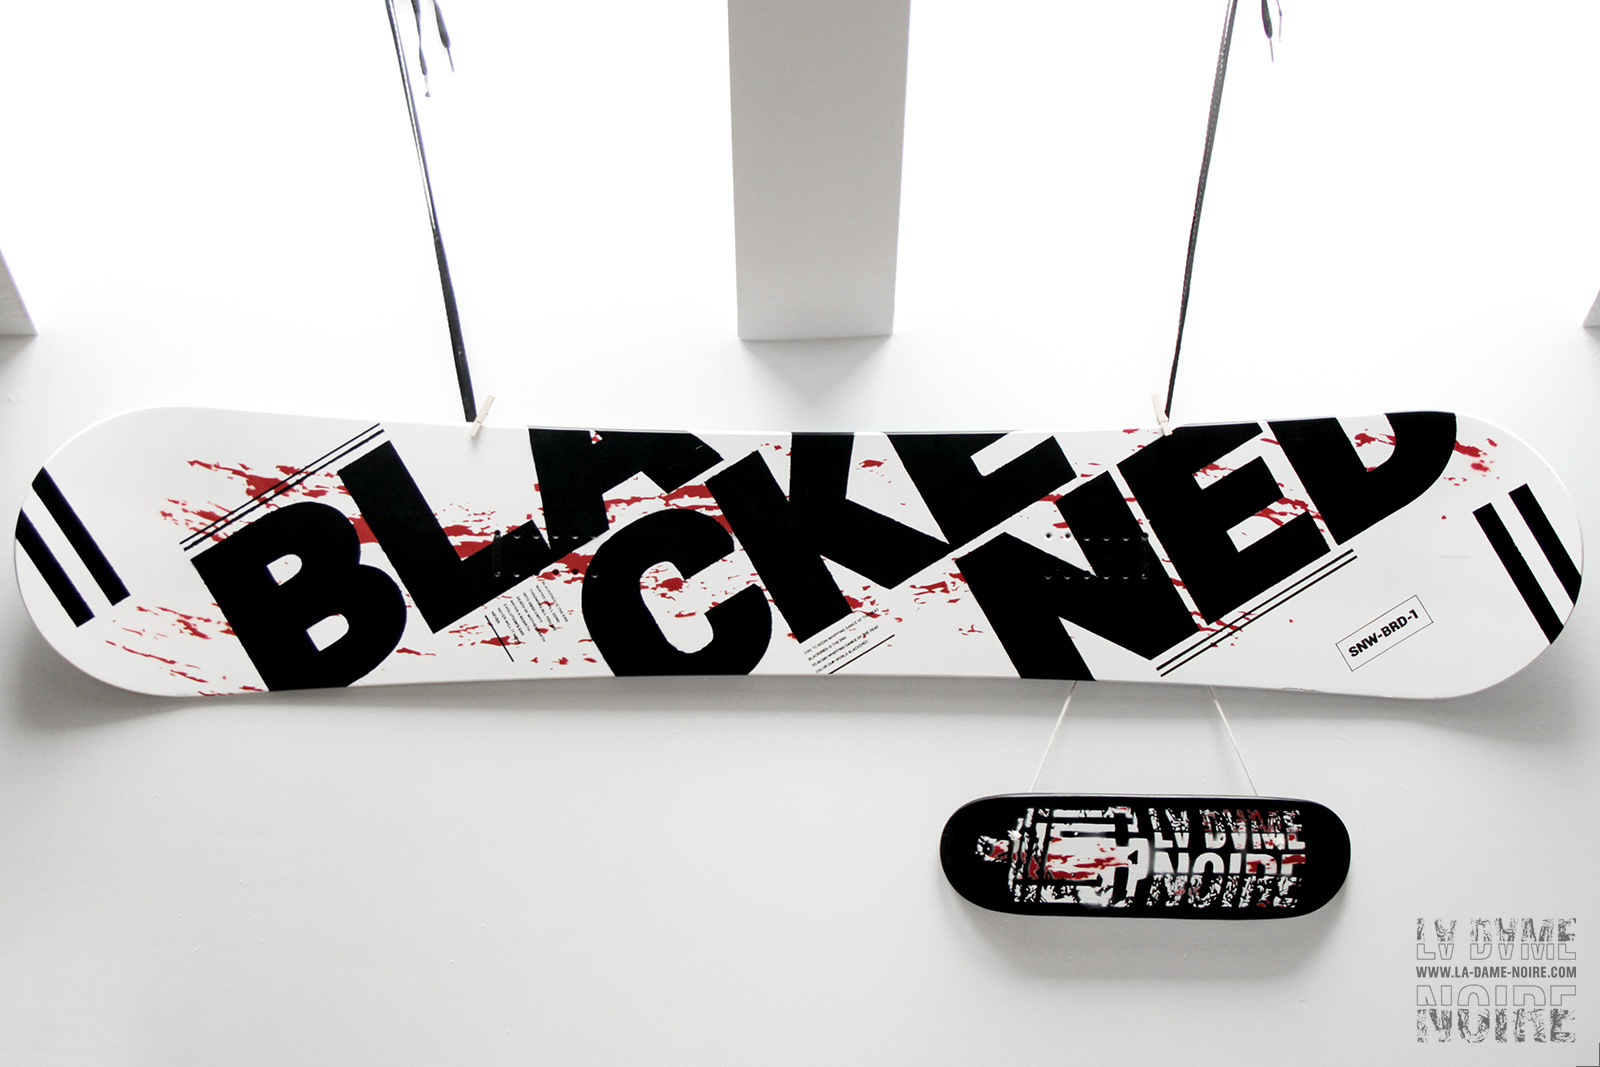 Main view of the snowboard and Tiny-skateboard painted in black, white, red, and the word Blackened in big bold letters